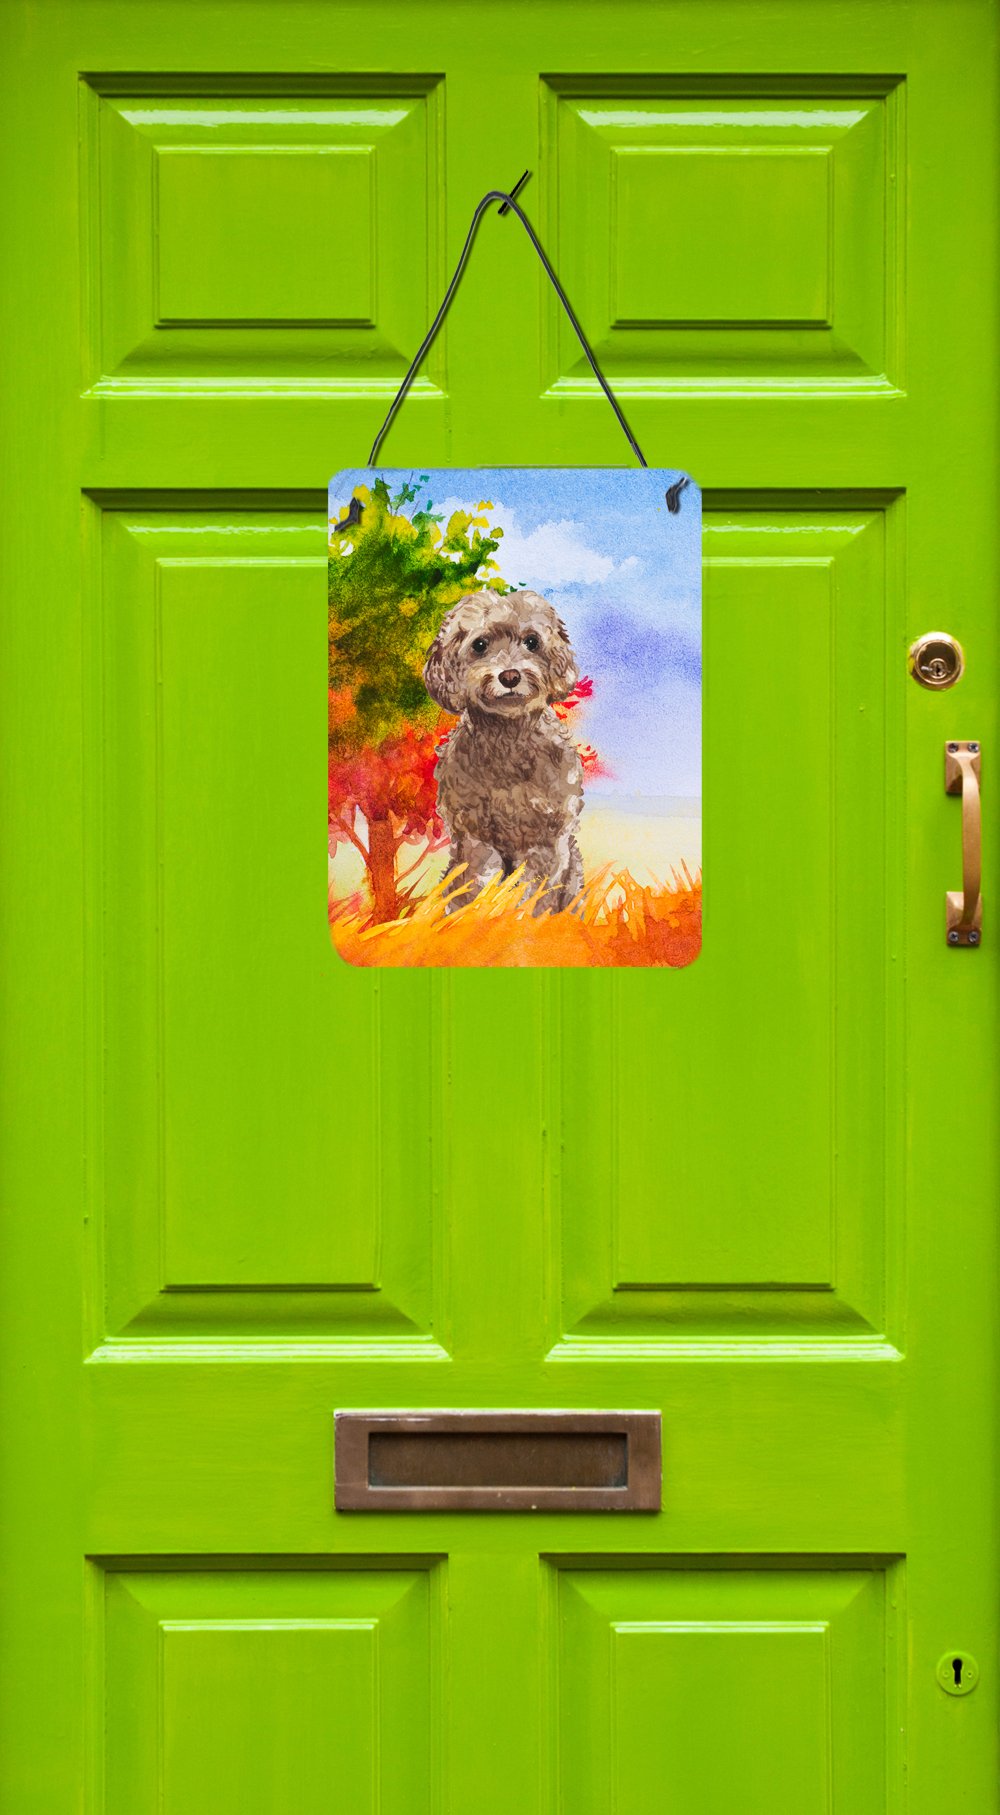 Fall Chocolate Labradoodle Wall or Door Hanging Prints CK1953DS1216 by Caroline's Treasures